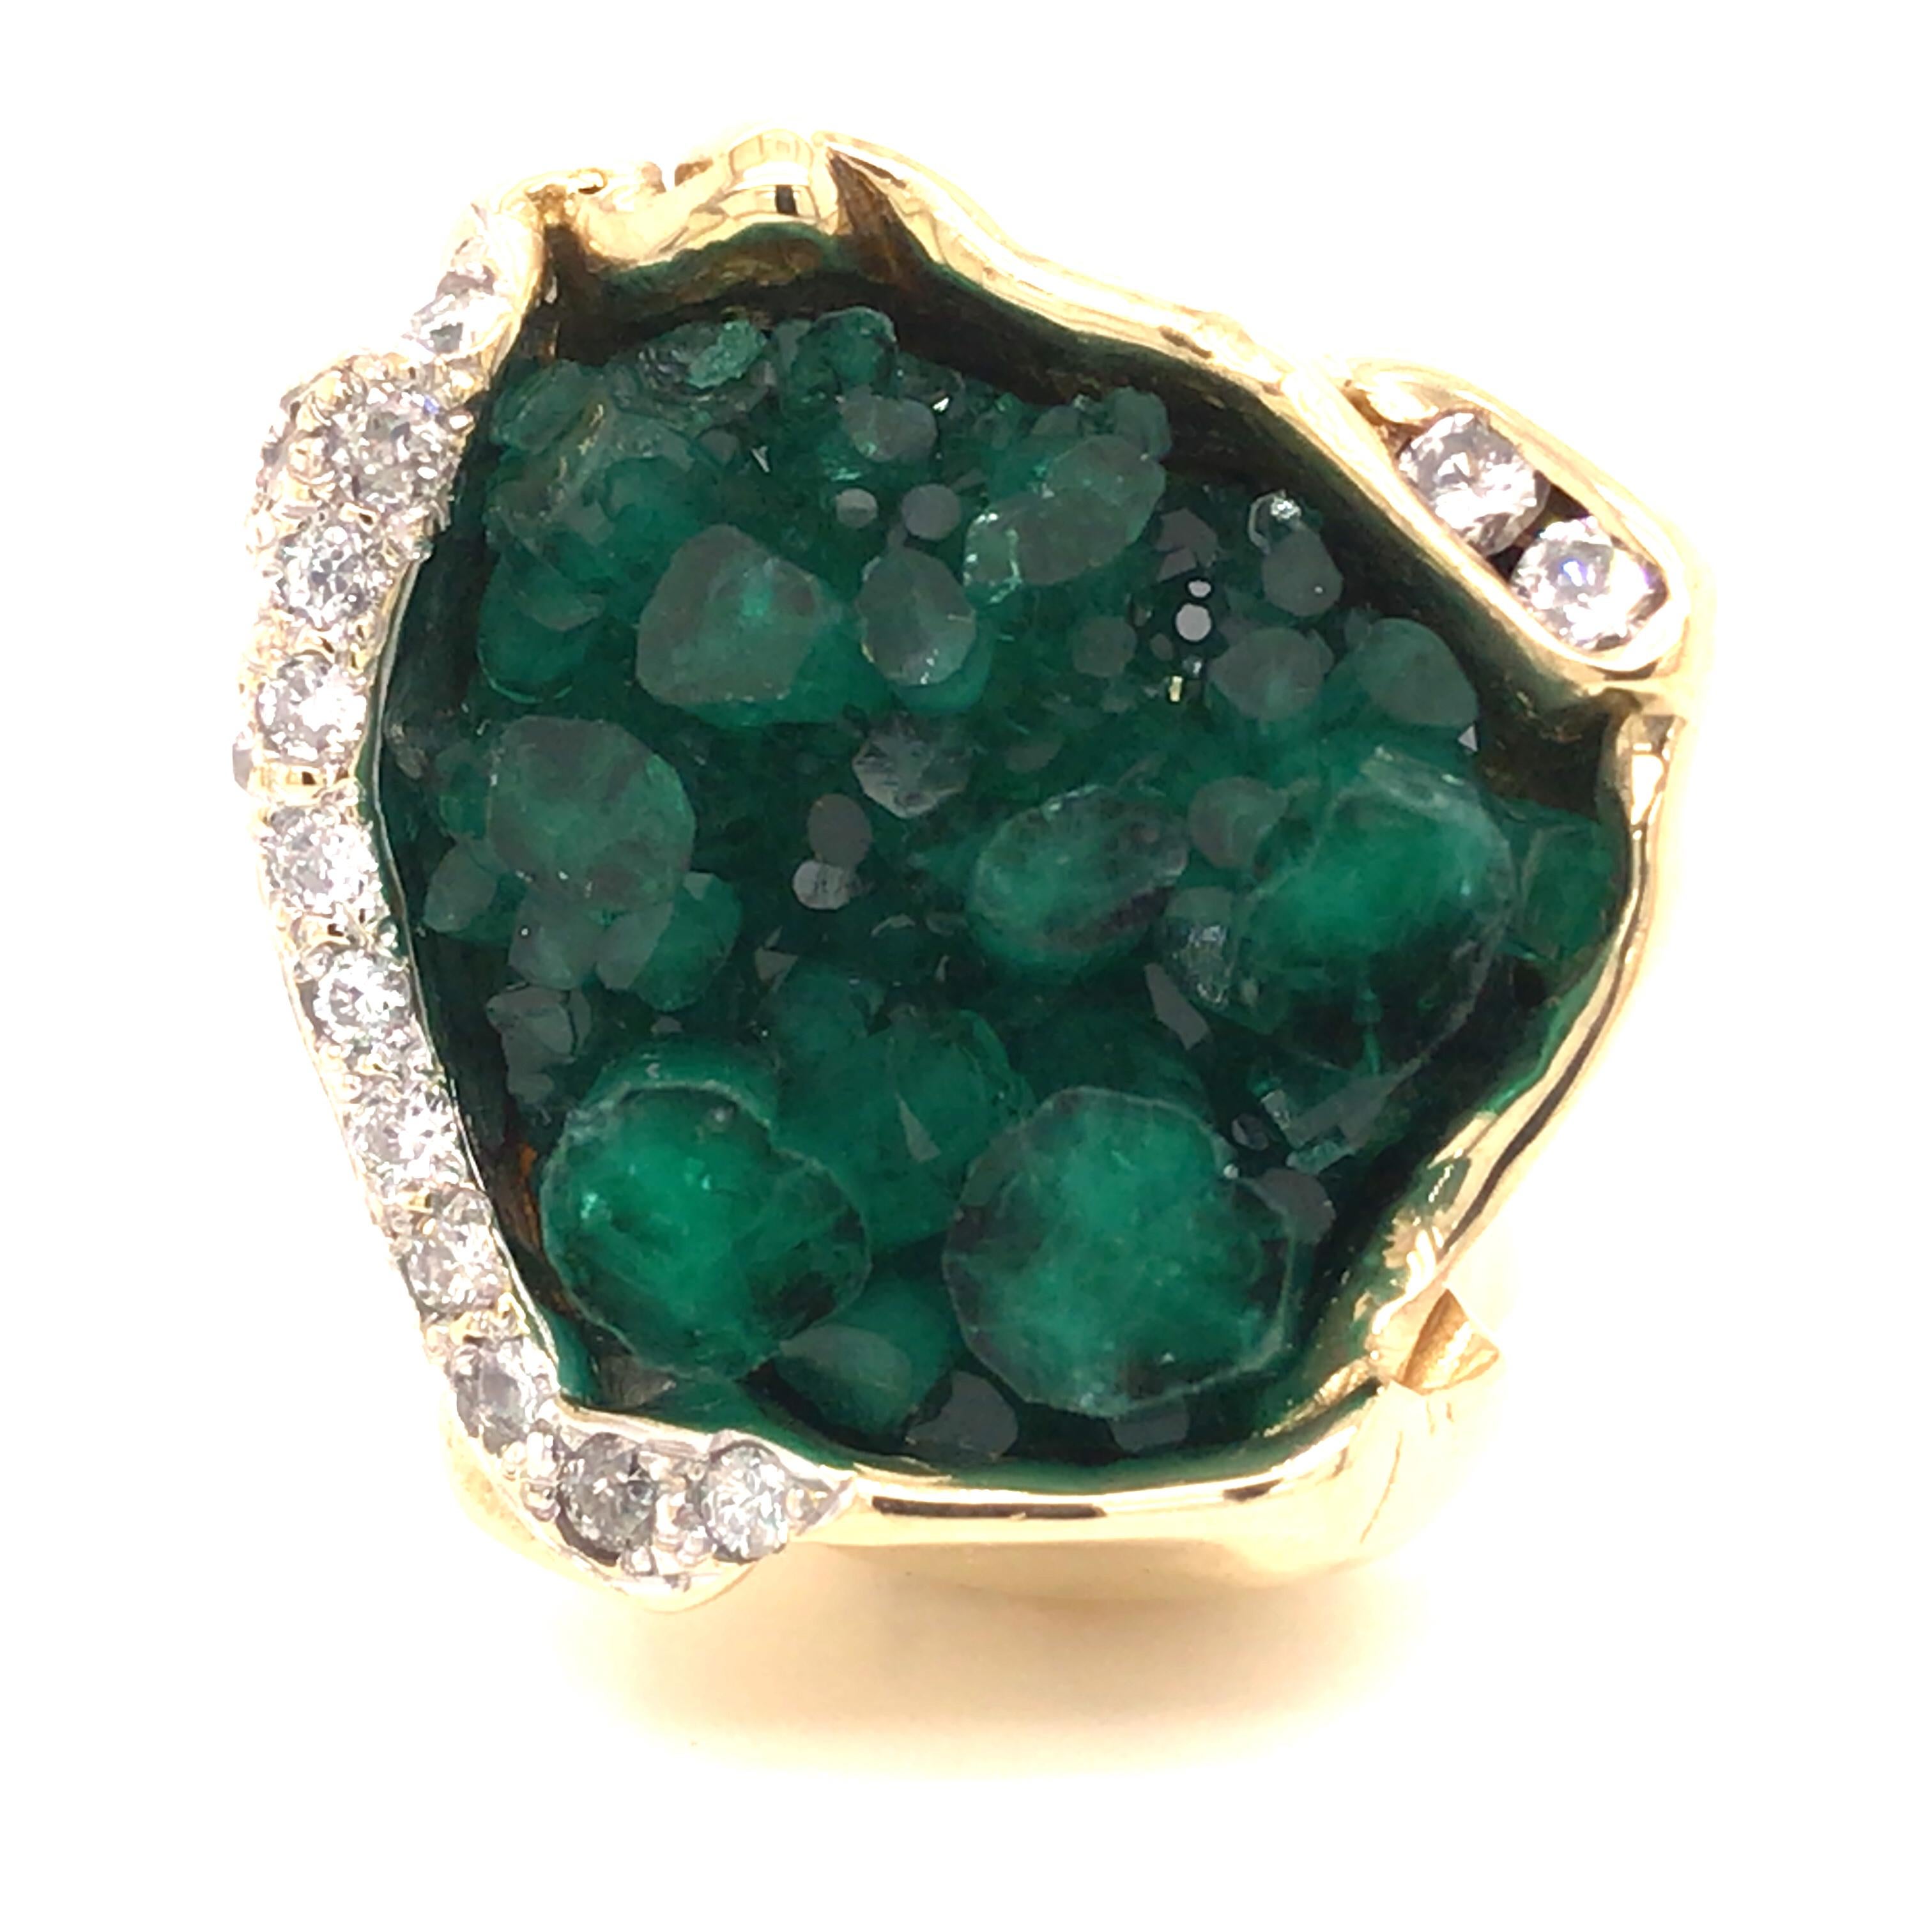 18K Raised Rough Emerald Diamond Ring Yellow Gold.  Rough Emerald is expertly set accented with Round Brilliant Cut Diamonds weighing 0.52 carat total weight, G-I in color and SI in clarity.  The Ring measures 1 inch in length and width. Ring size